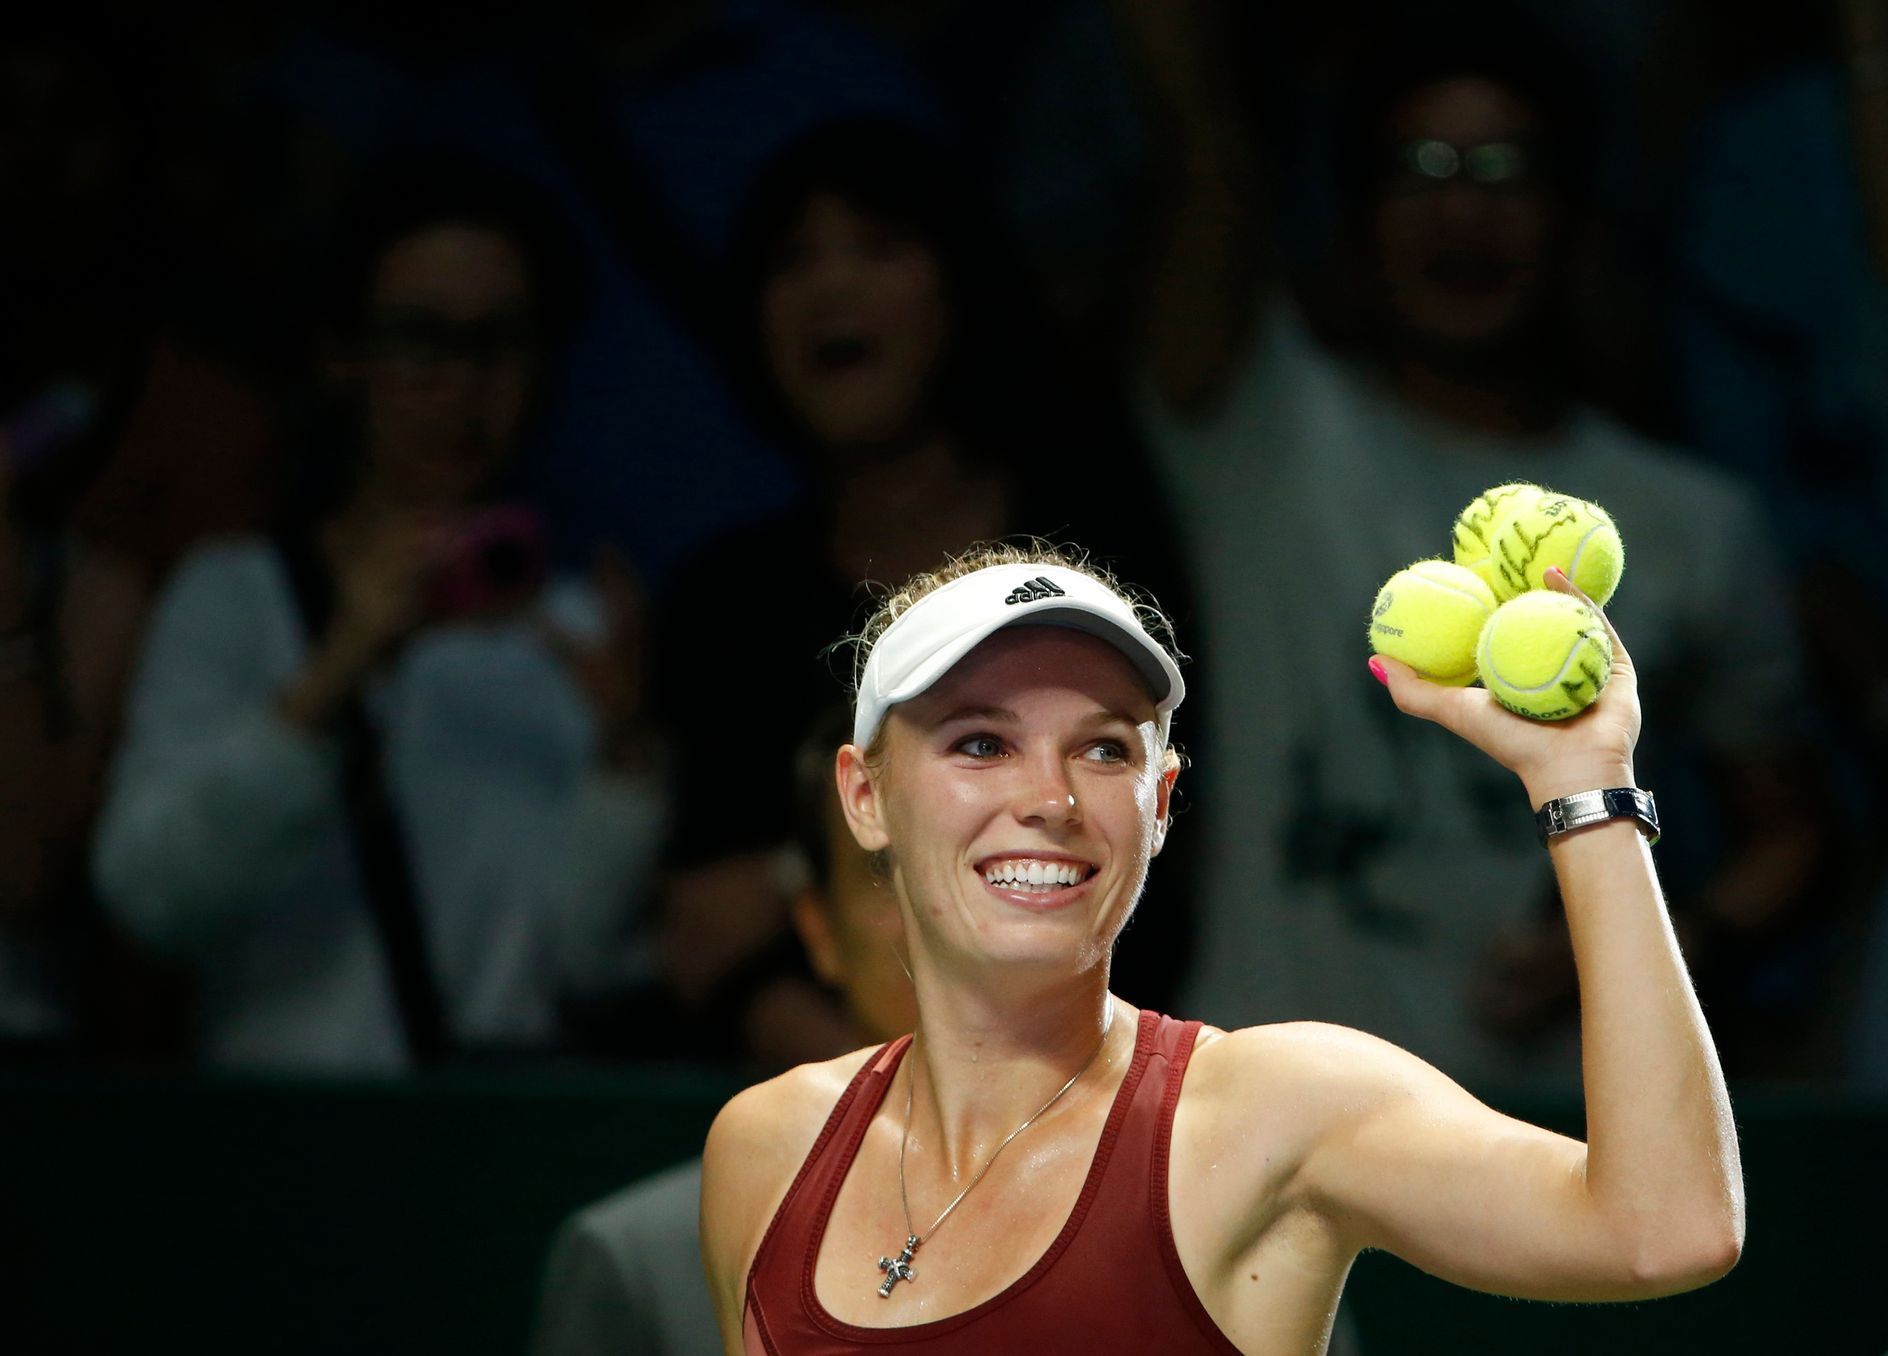 Wozniacki of Denmark prepares to hit balls to the audience after defeating Radwanska of Poland during their WTA Finals singles tennis match at the Singapore Indoor Stadium